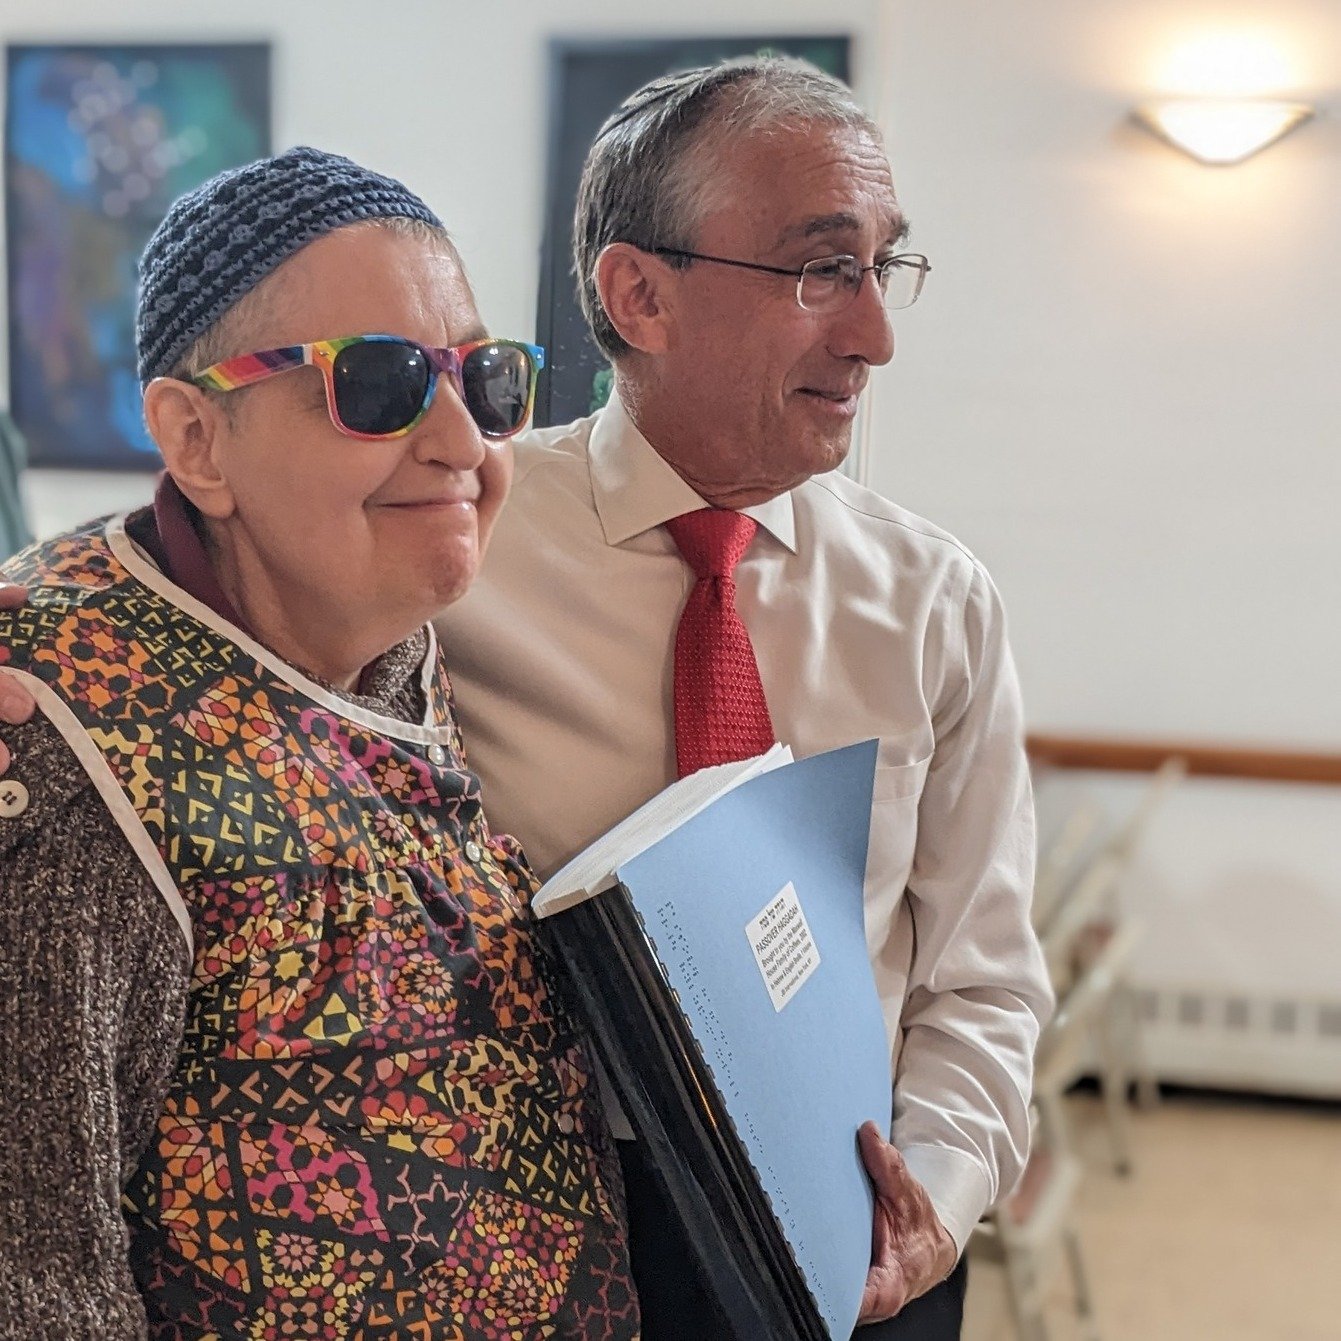 Everyone at our Seder is a guest of honor, from Eliyahu to Cynthia Groopman, Ashreynu's President. Last year she joined us for the Seder with her Braille Haggadah, which - just as a Haggadah should do - helps her participate in the Seder with singing